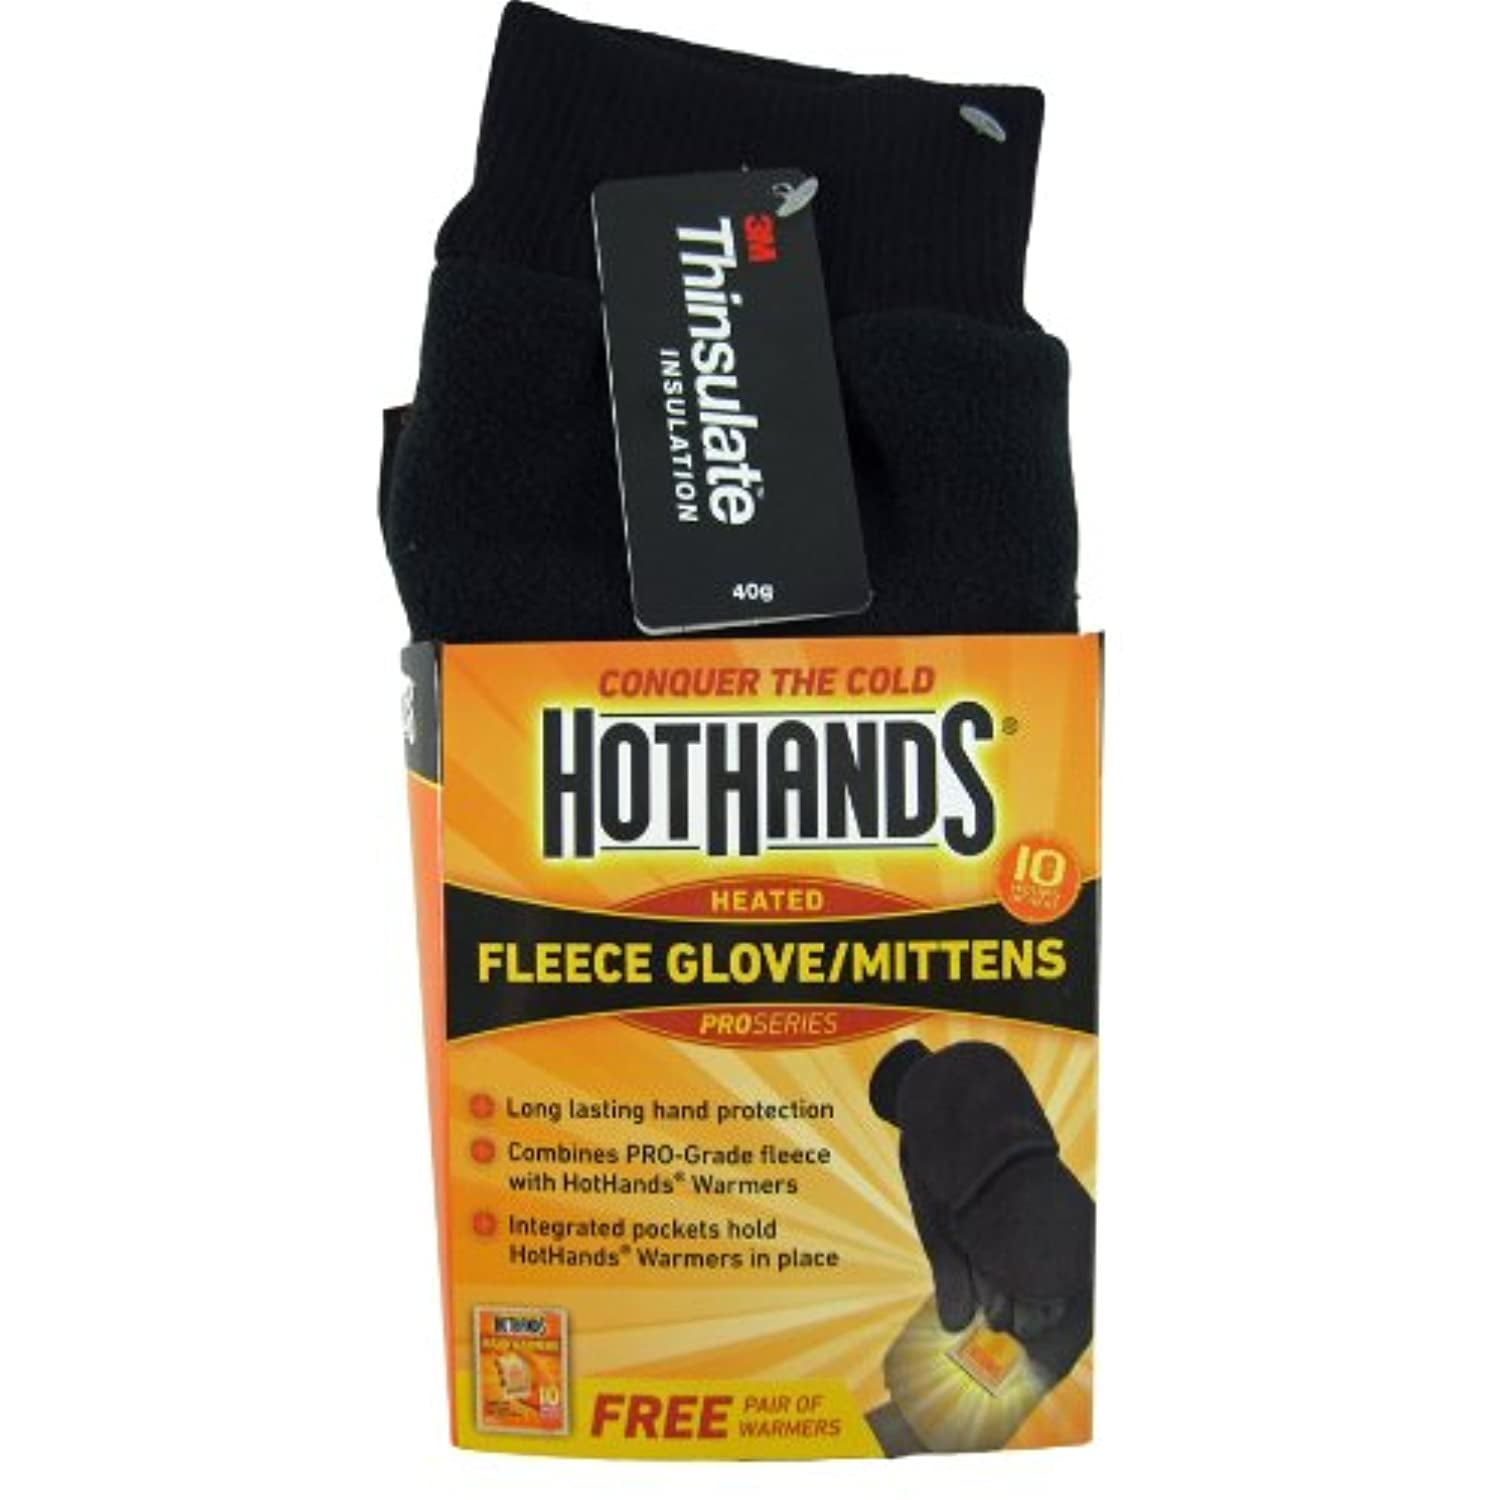 HOTHANDS FLEECE INSULATED PULLBACK MITTENS GLOVES SIZE MEDIUM LARGE 